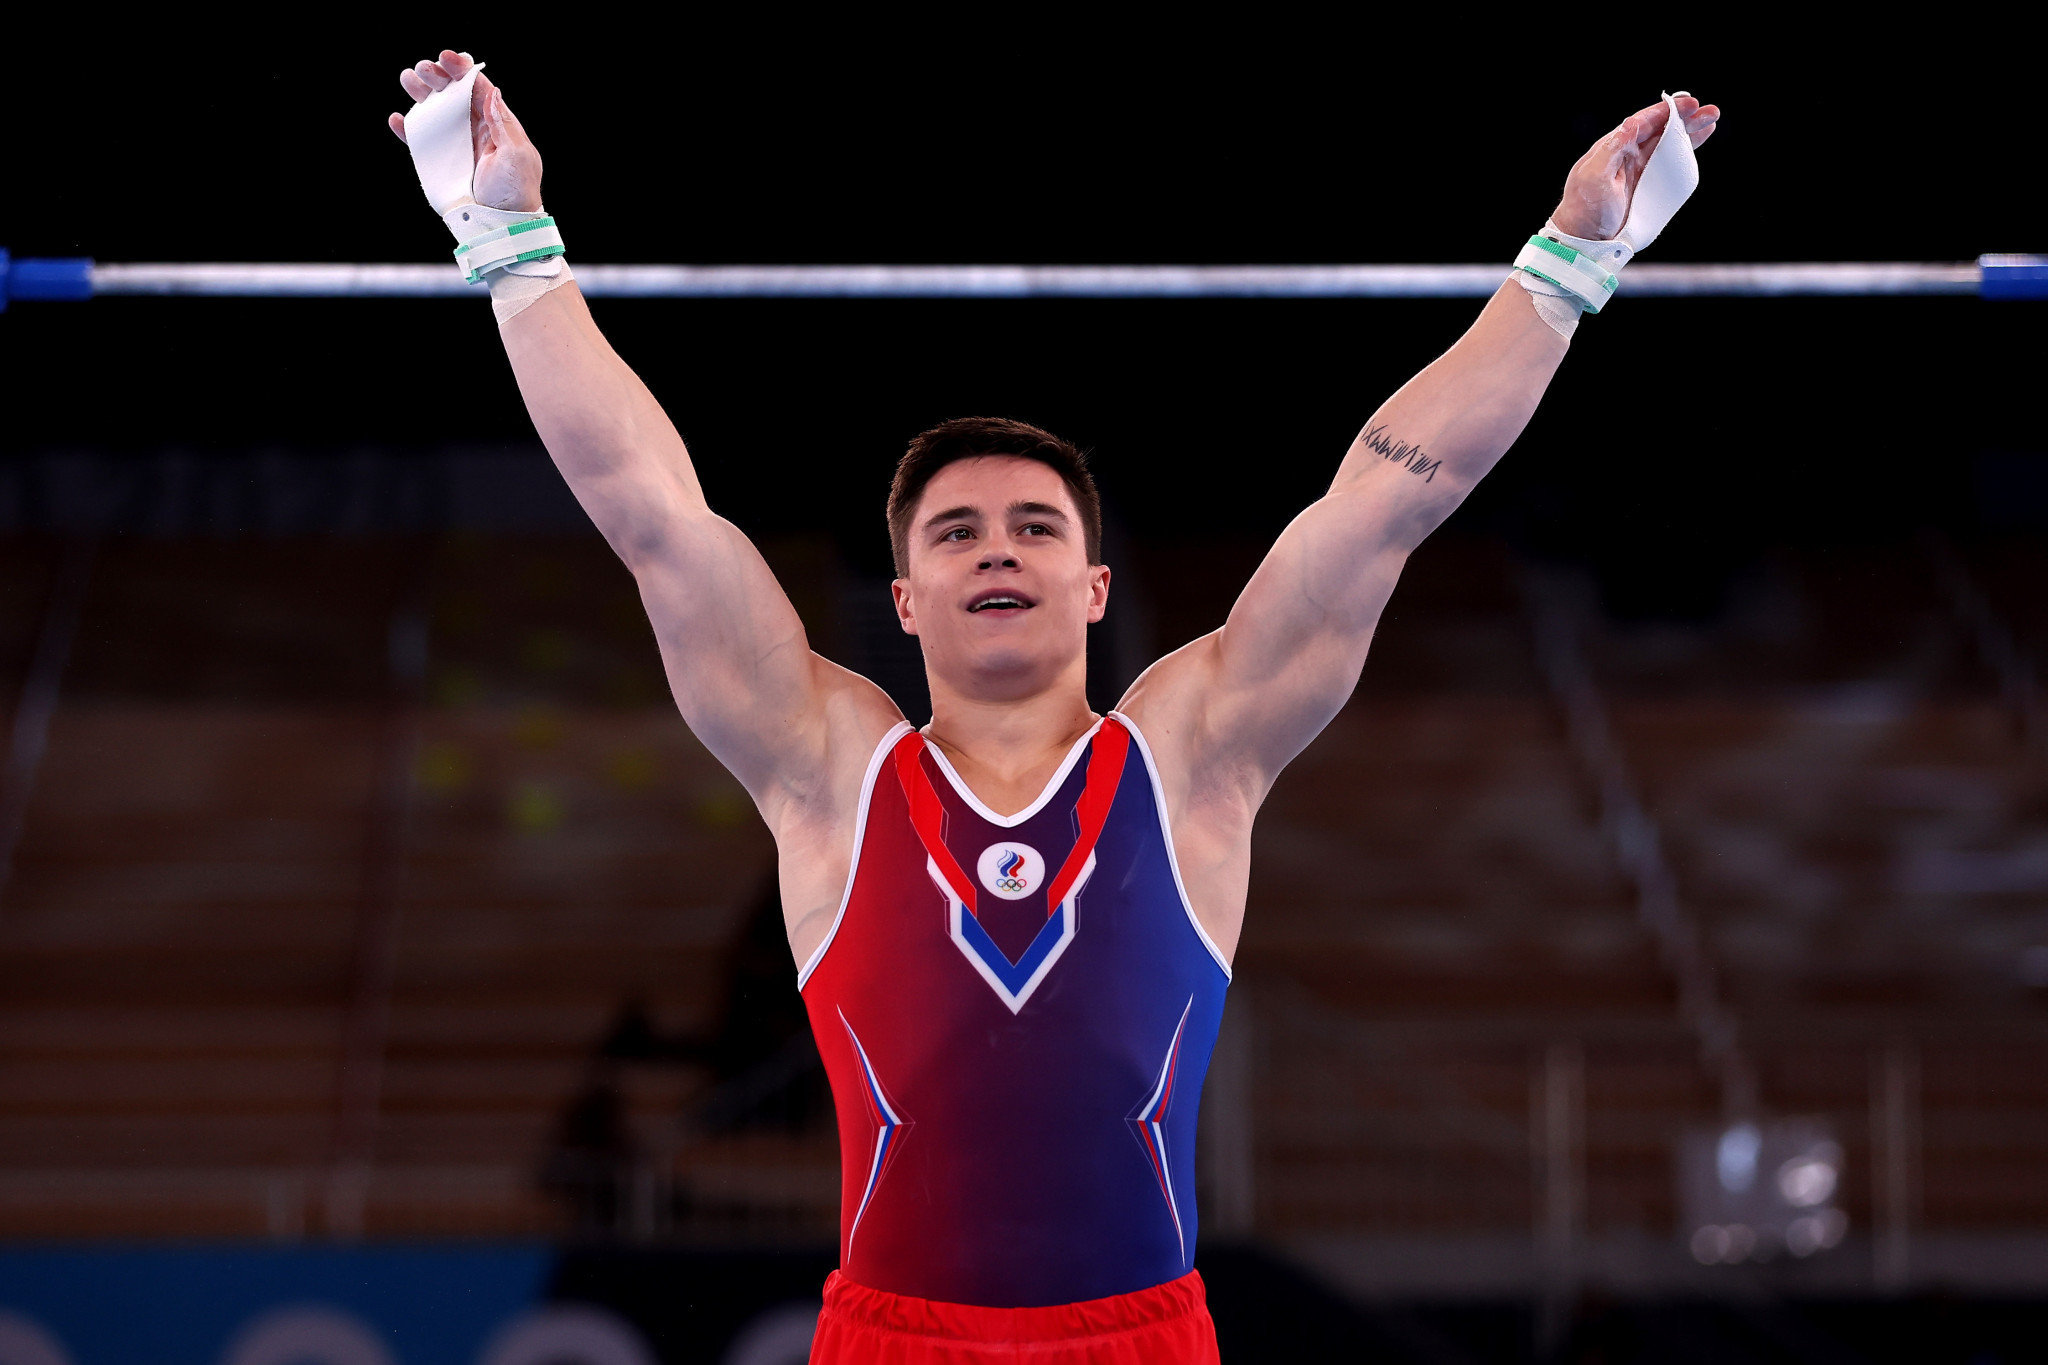 Russian Olympic gymnastics champion Nagornyy added to Canadian Government sanctions list